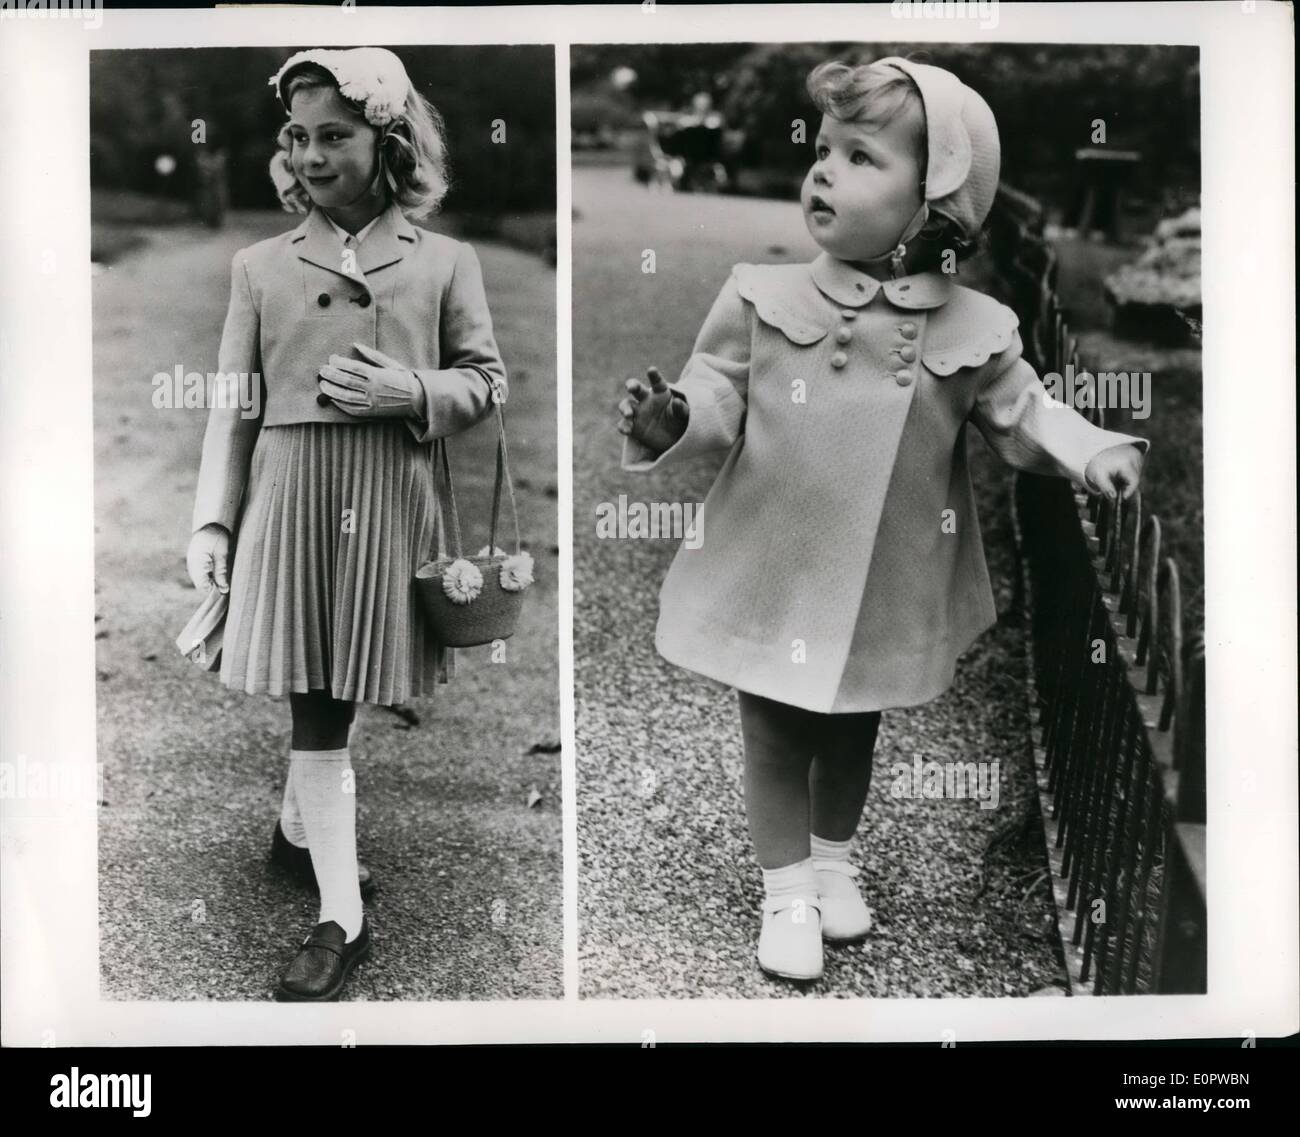 Mar. 03, 1957 - High style for small fry; Two models from Minimode of London give some idea of what the very young English set will look like on Easter and through the spring. Photo Shows left: Spring suit in tweed for a little girl. The pleated skirt has a bib decorated with an attractive cherry motif. The shorty jacket is double breasted and has a hipped in effect at the sides of the back. Right: Pure wool coat for a toddler. The yoke is trimmed with scallops and has embroidery to match that on the Peter Pan collar. The double breasted front has six high buttons. Stock Photo